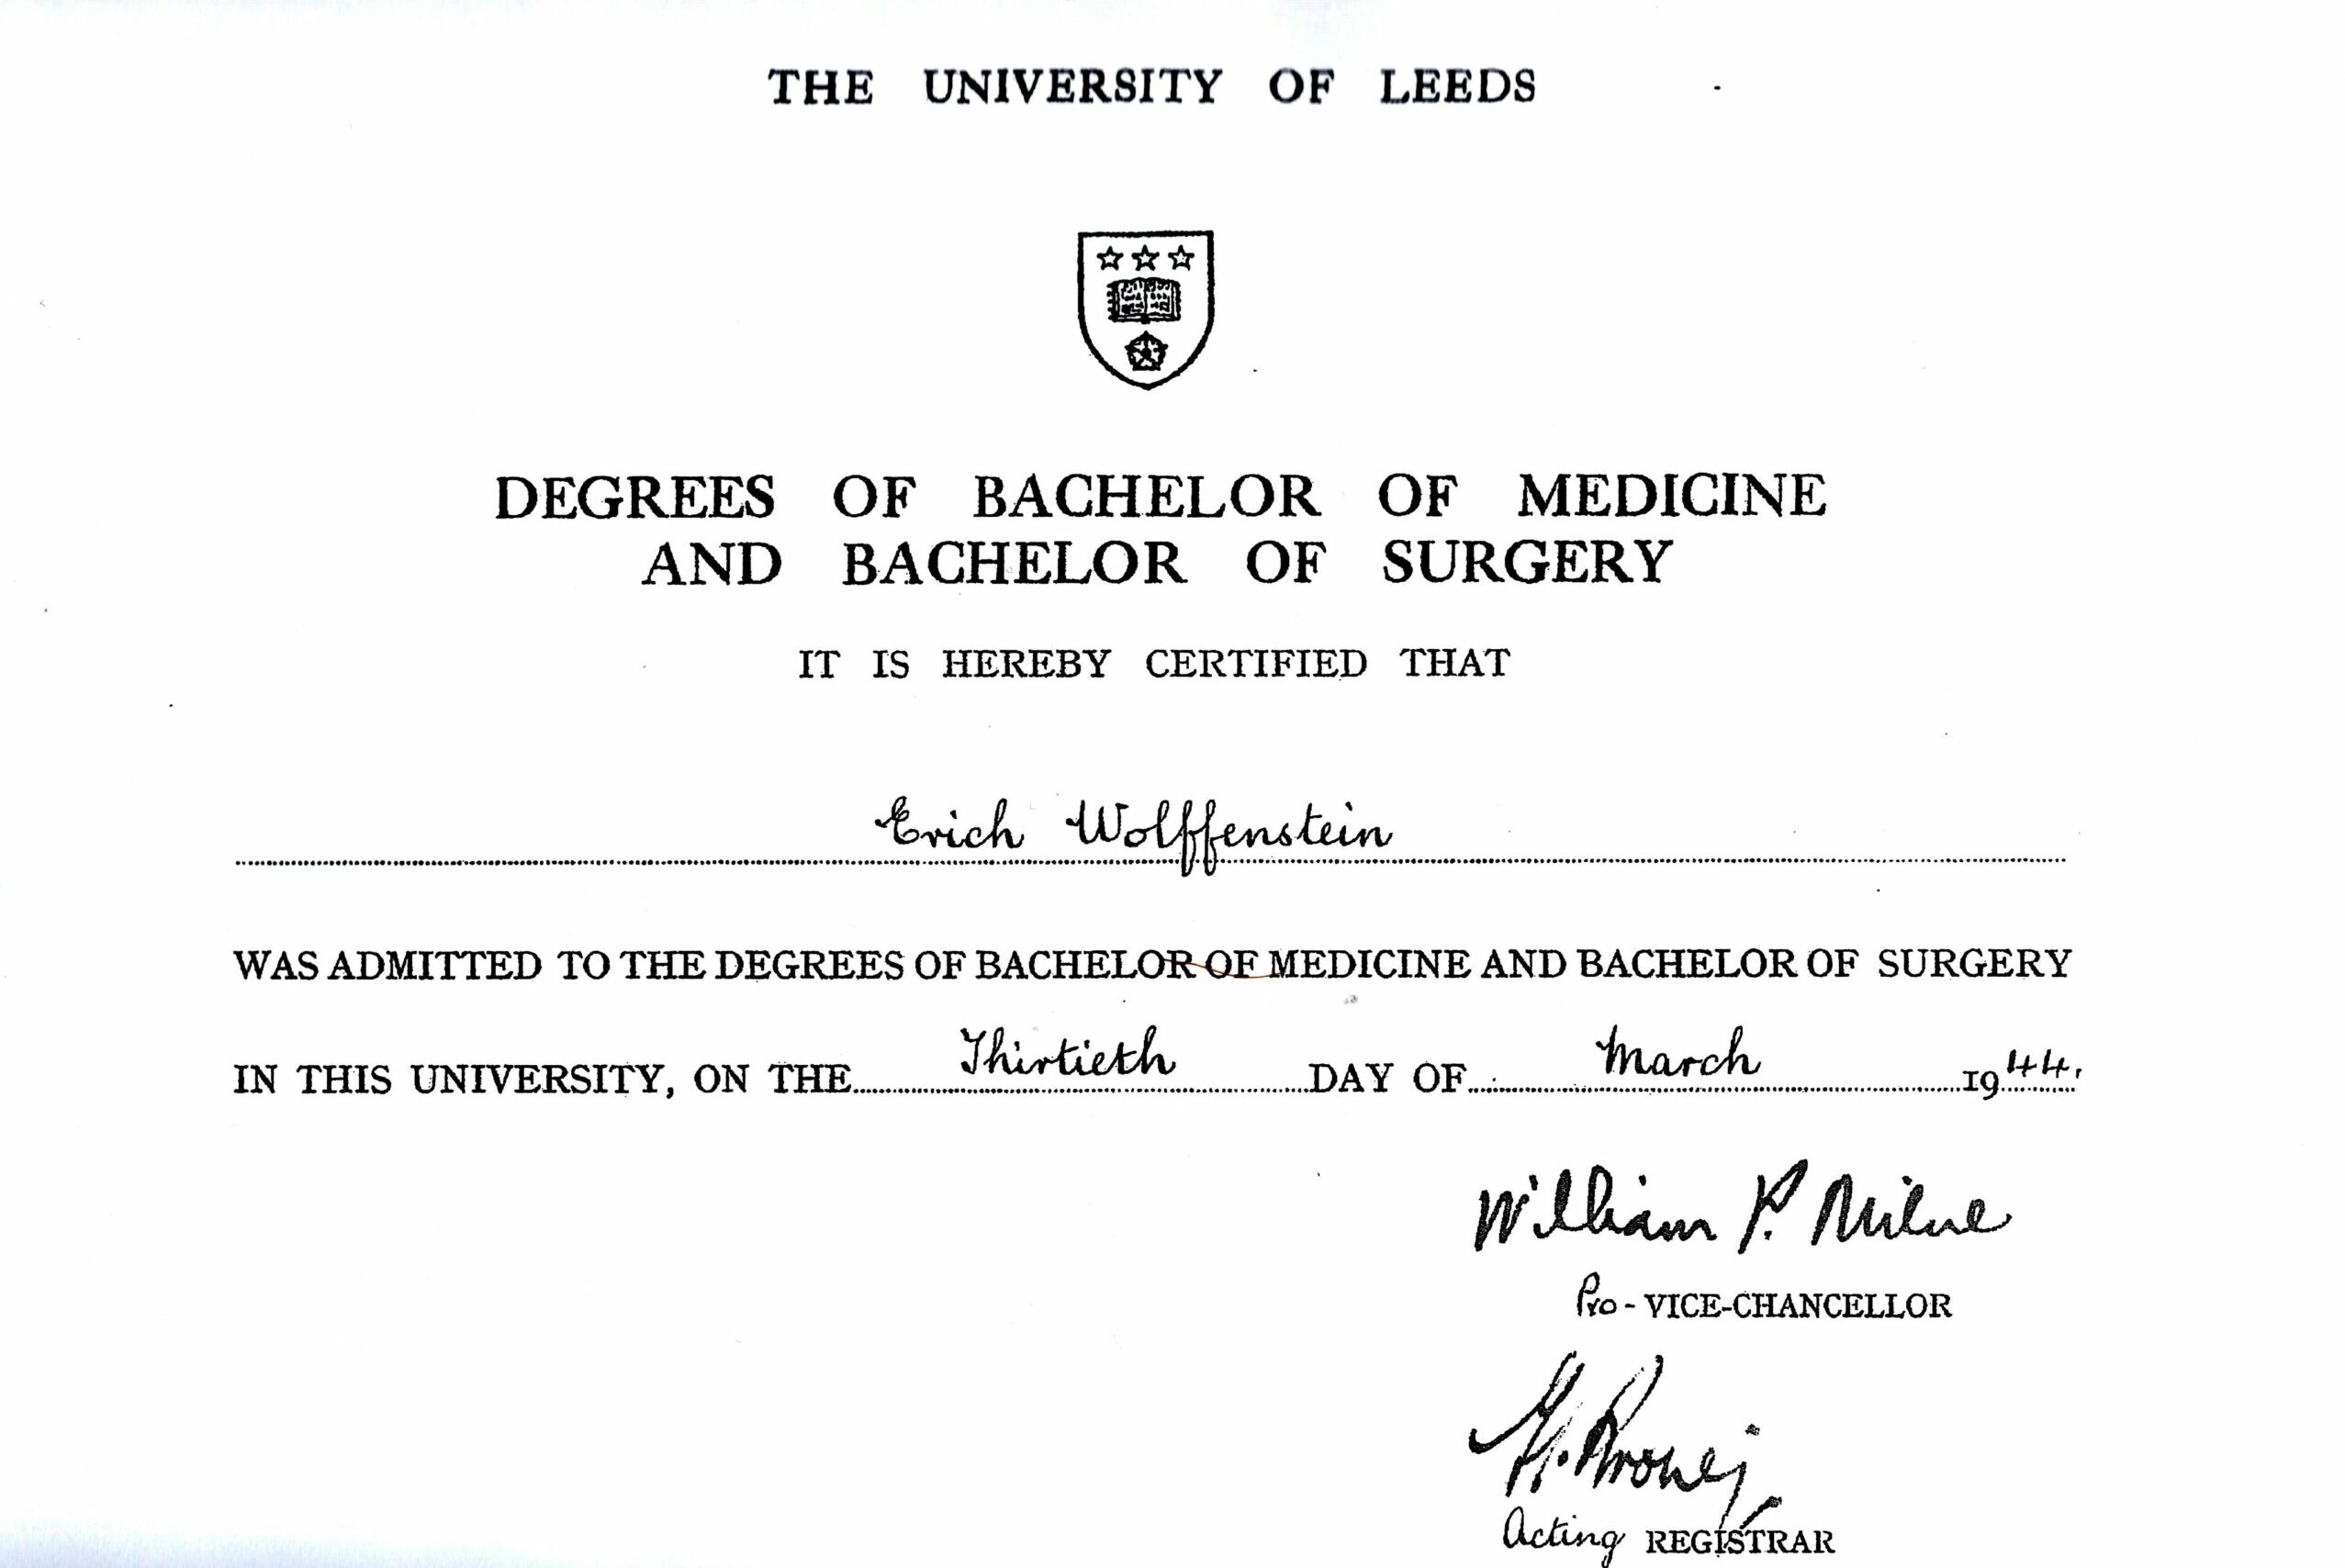 Certificate of the University of Leeds, <br> 1944 © Instanes Family